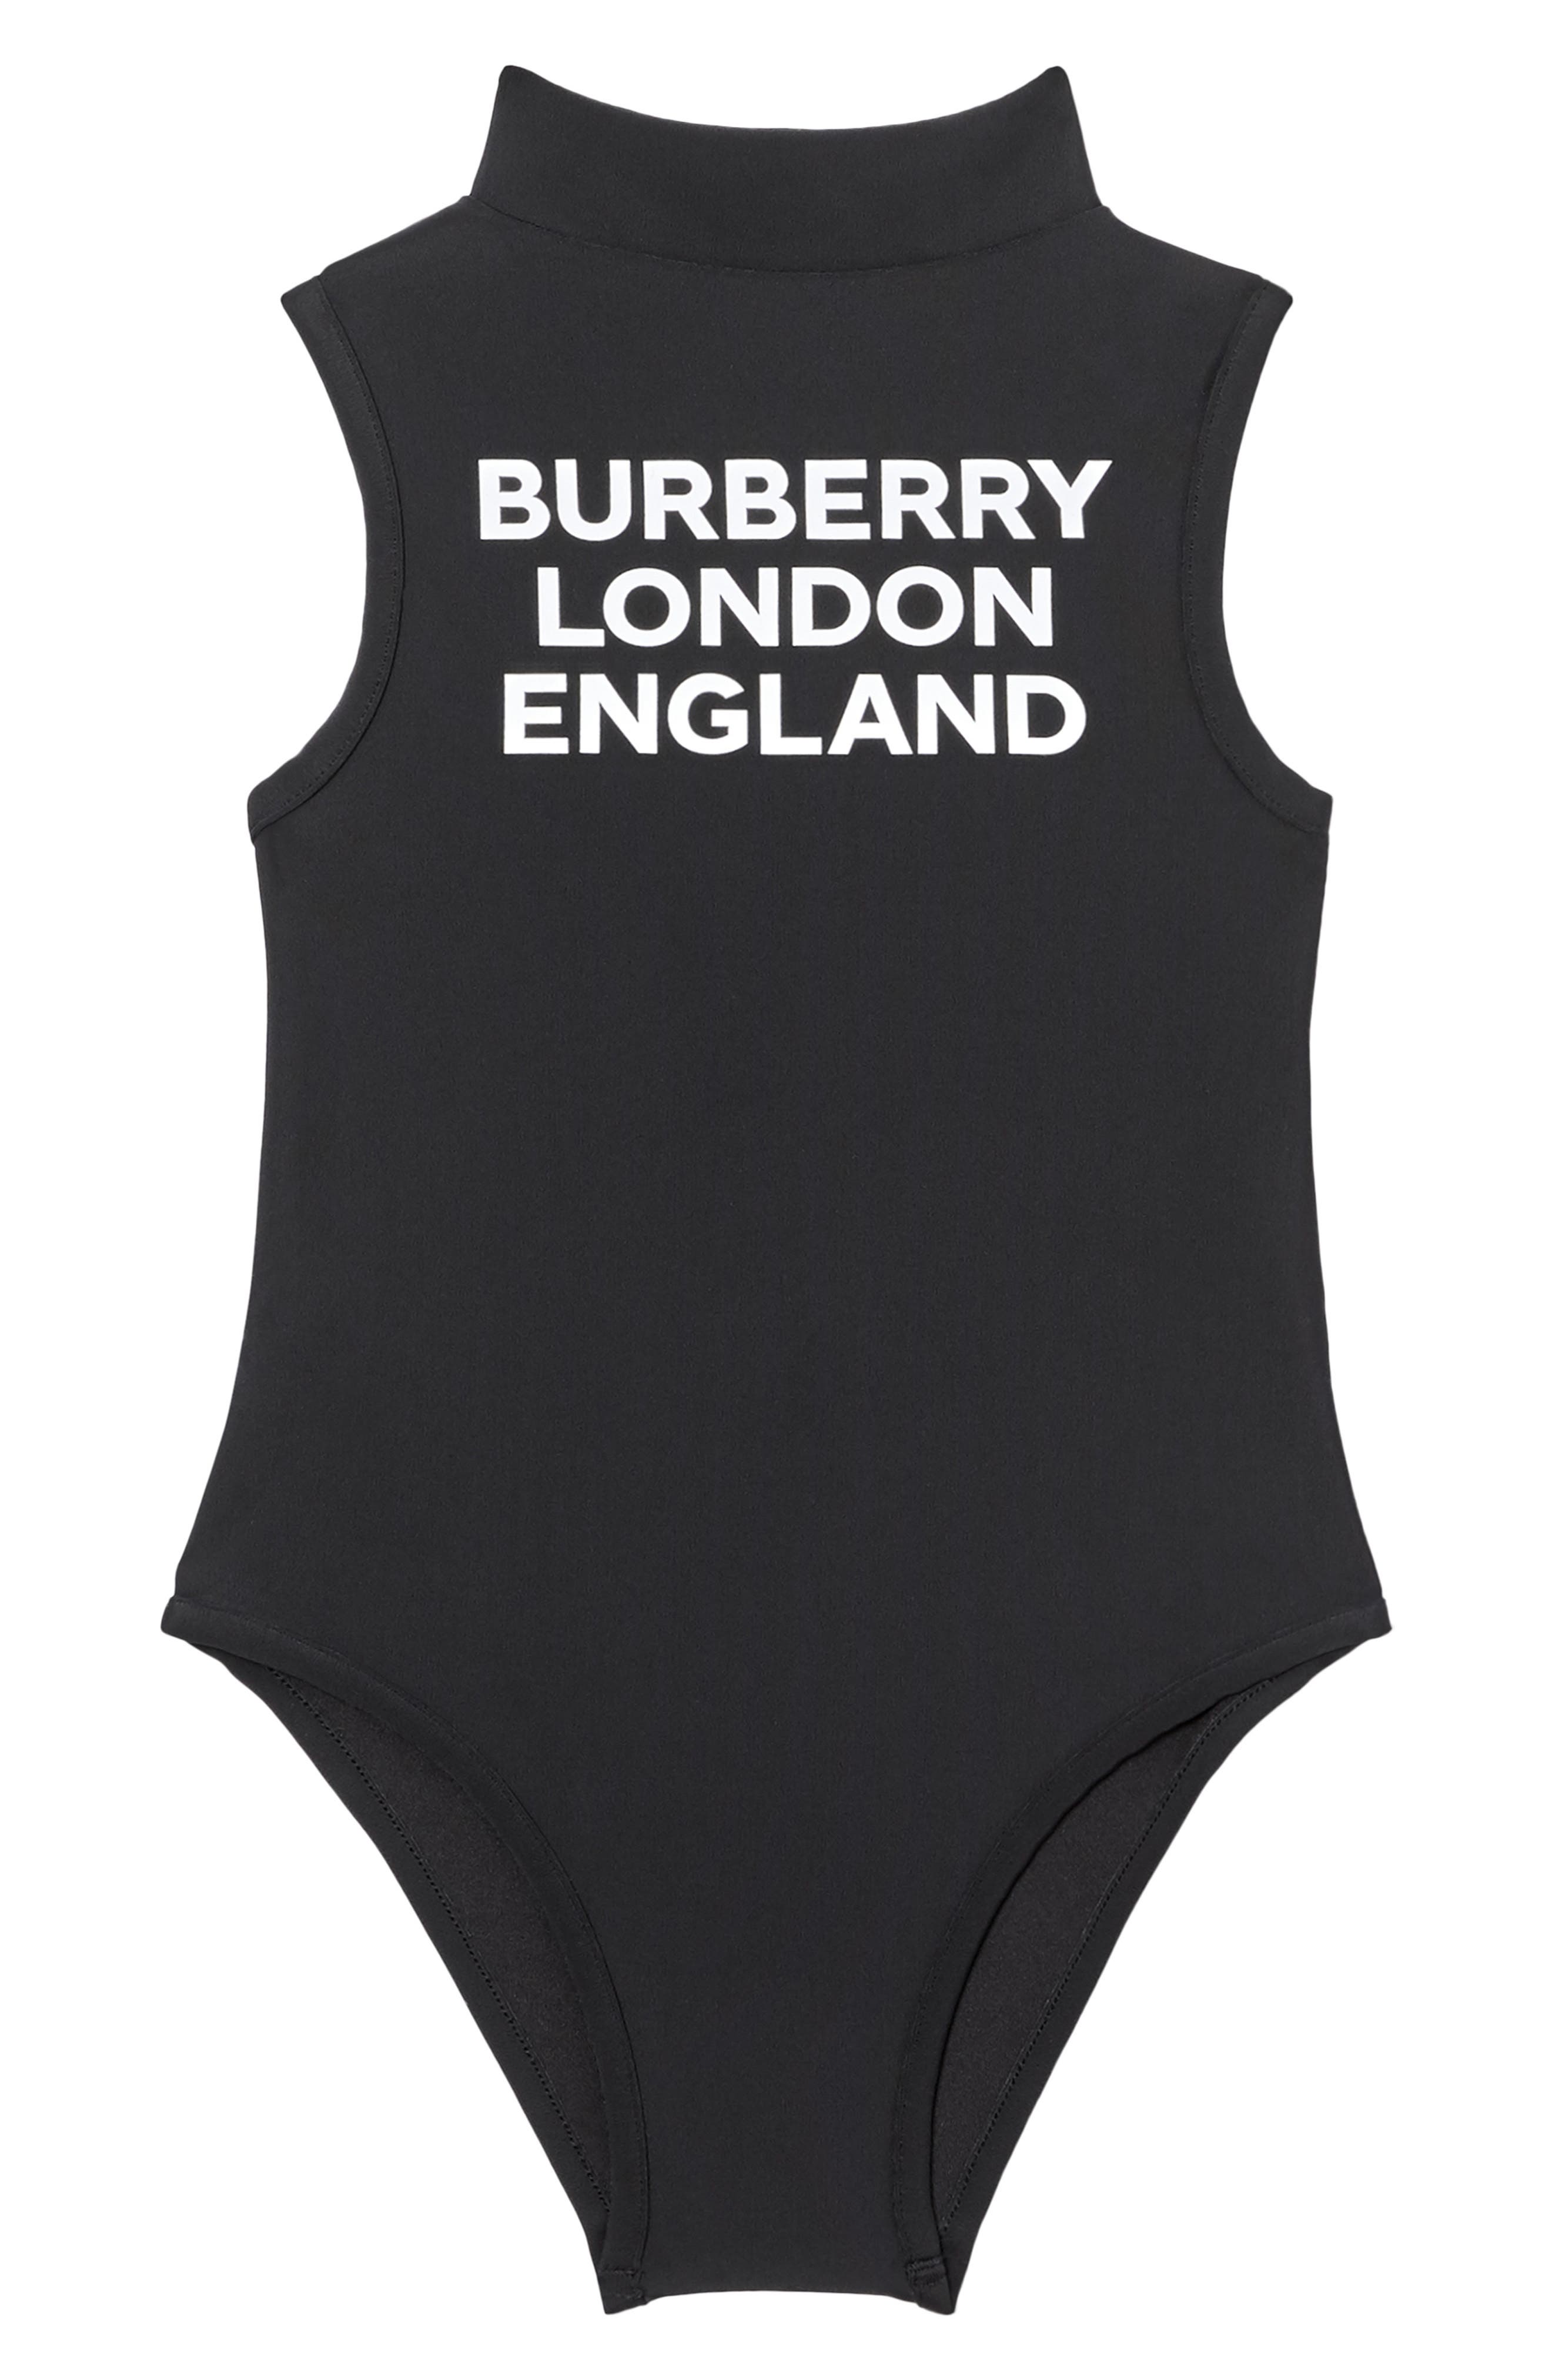 burberry toddler girl bathing suit